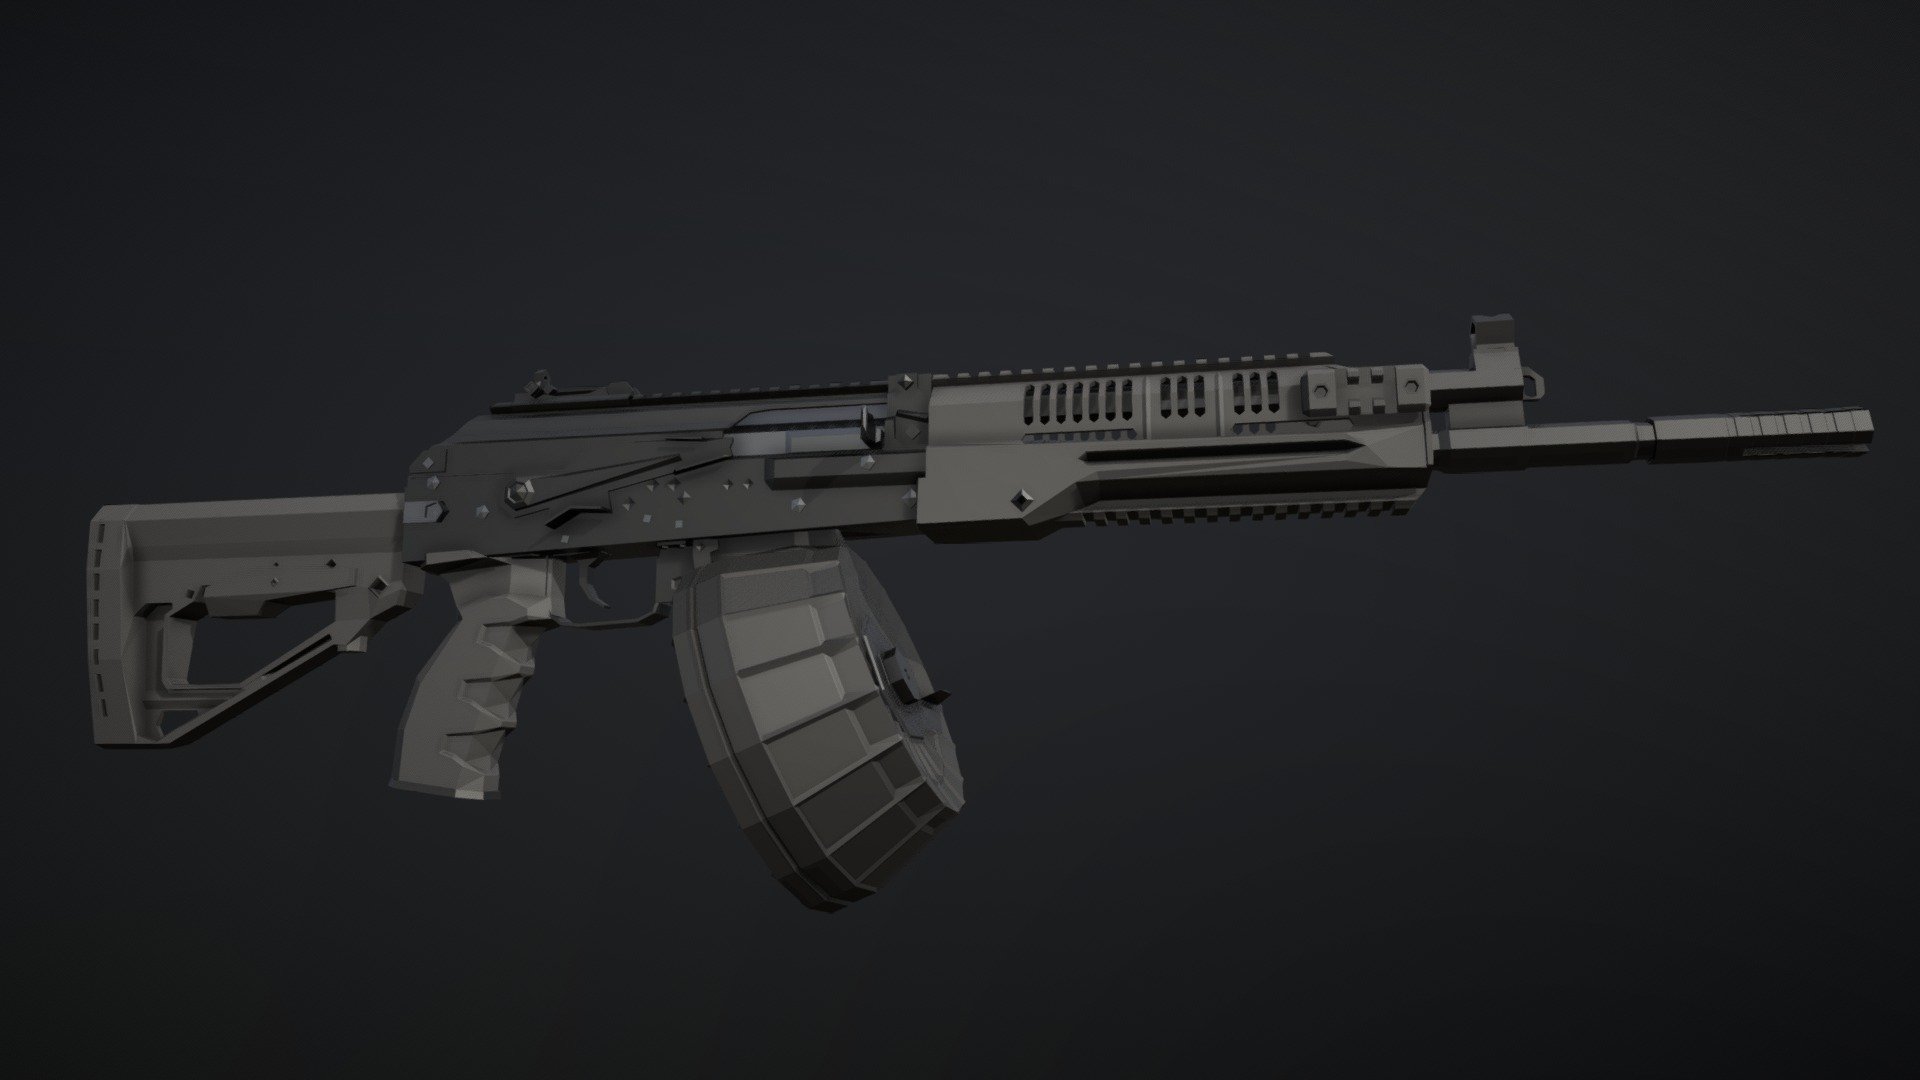 Low-Poly model of the RPK-16, a modernized variant of the RPK, with polymer furniture similar to the AK-12's, as well as a polymer drum magazine 3d model